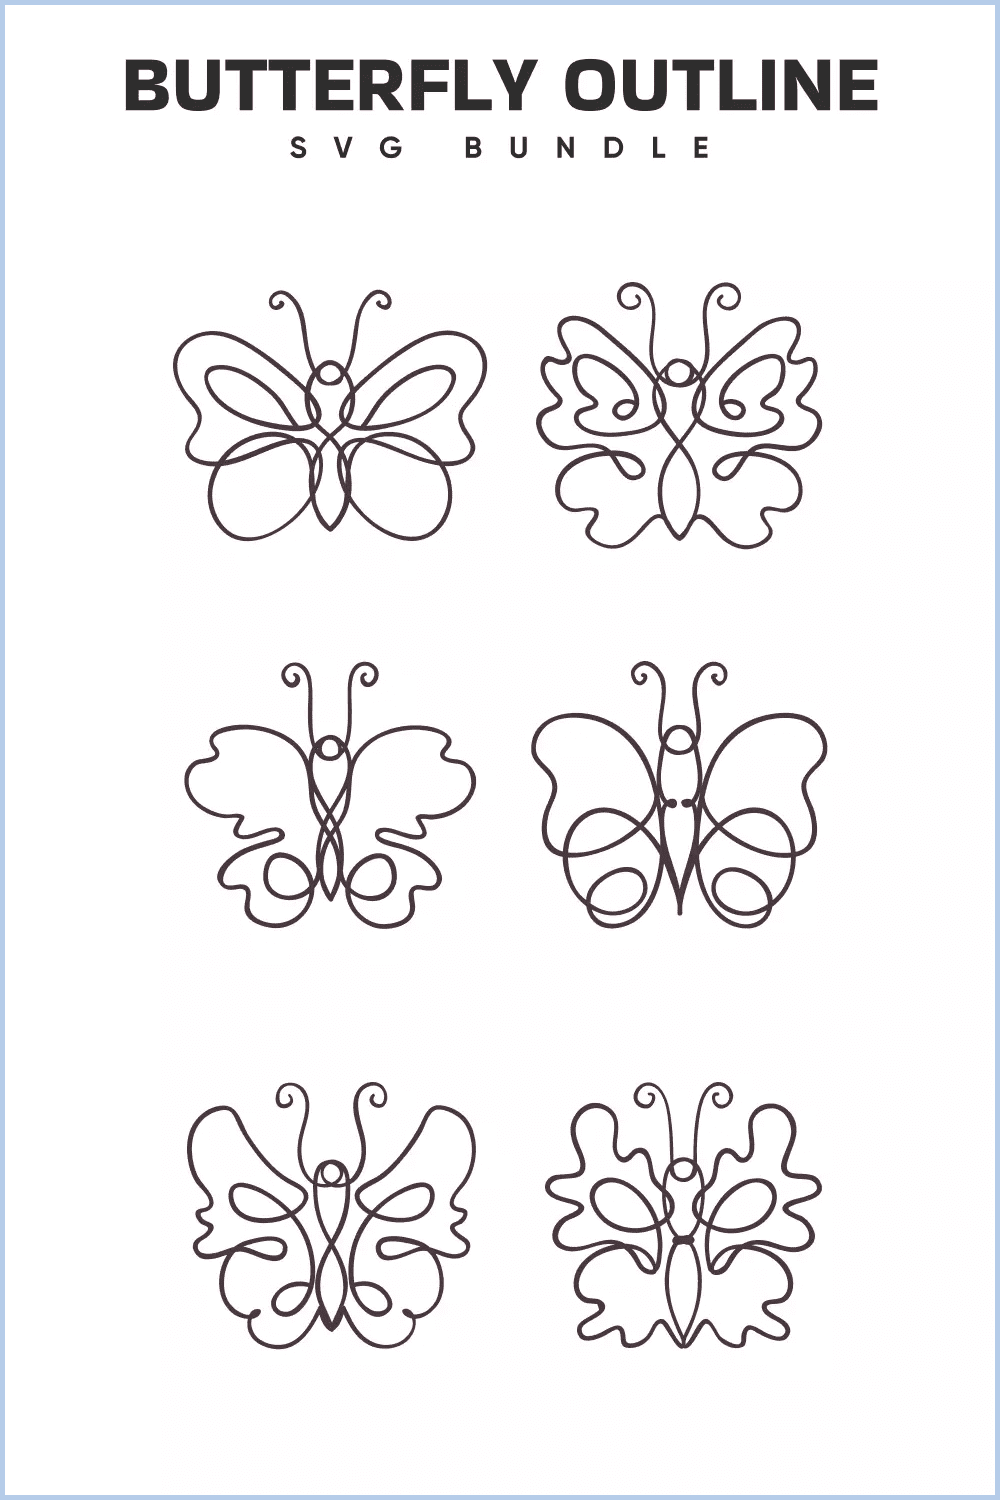 6 images with butterfly outline.